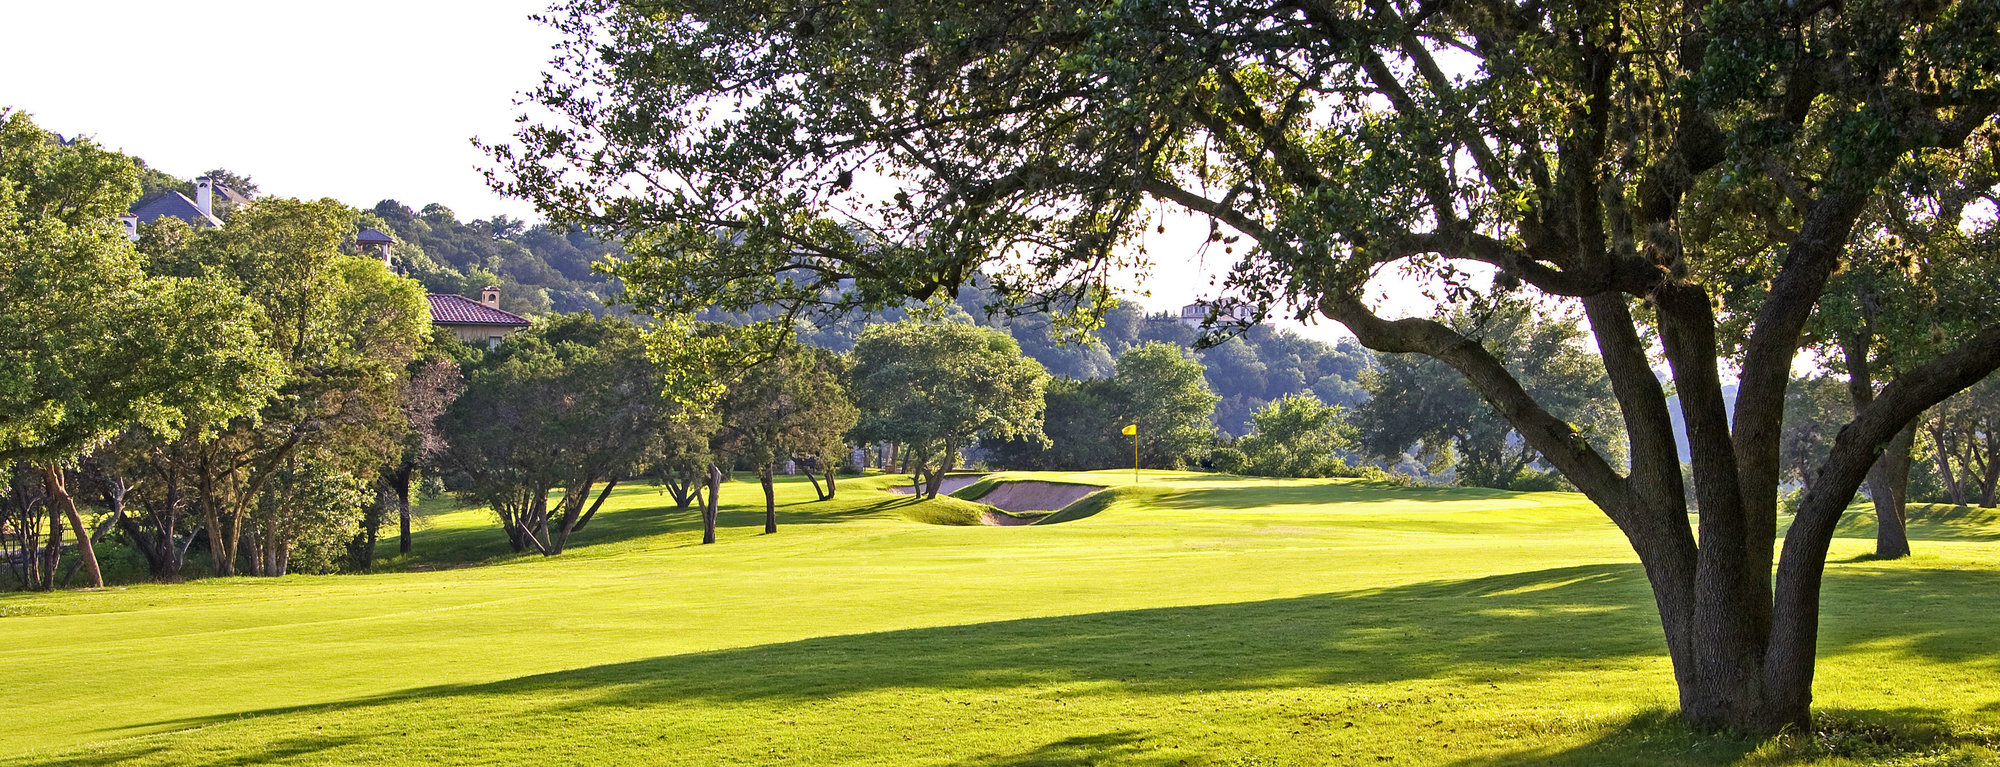 austin homes for sale with a golf course view